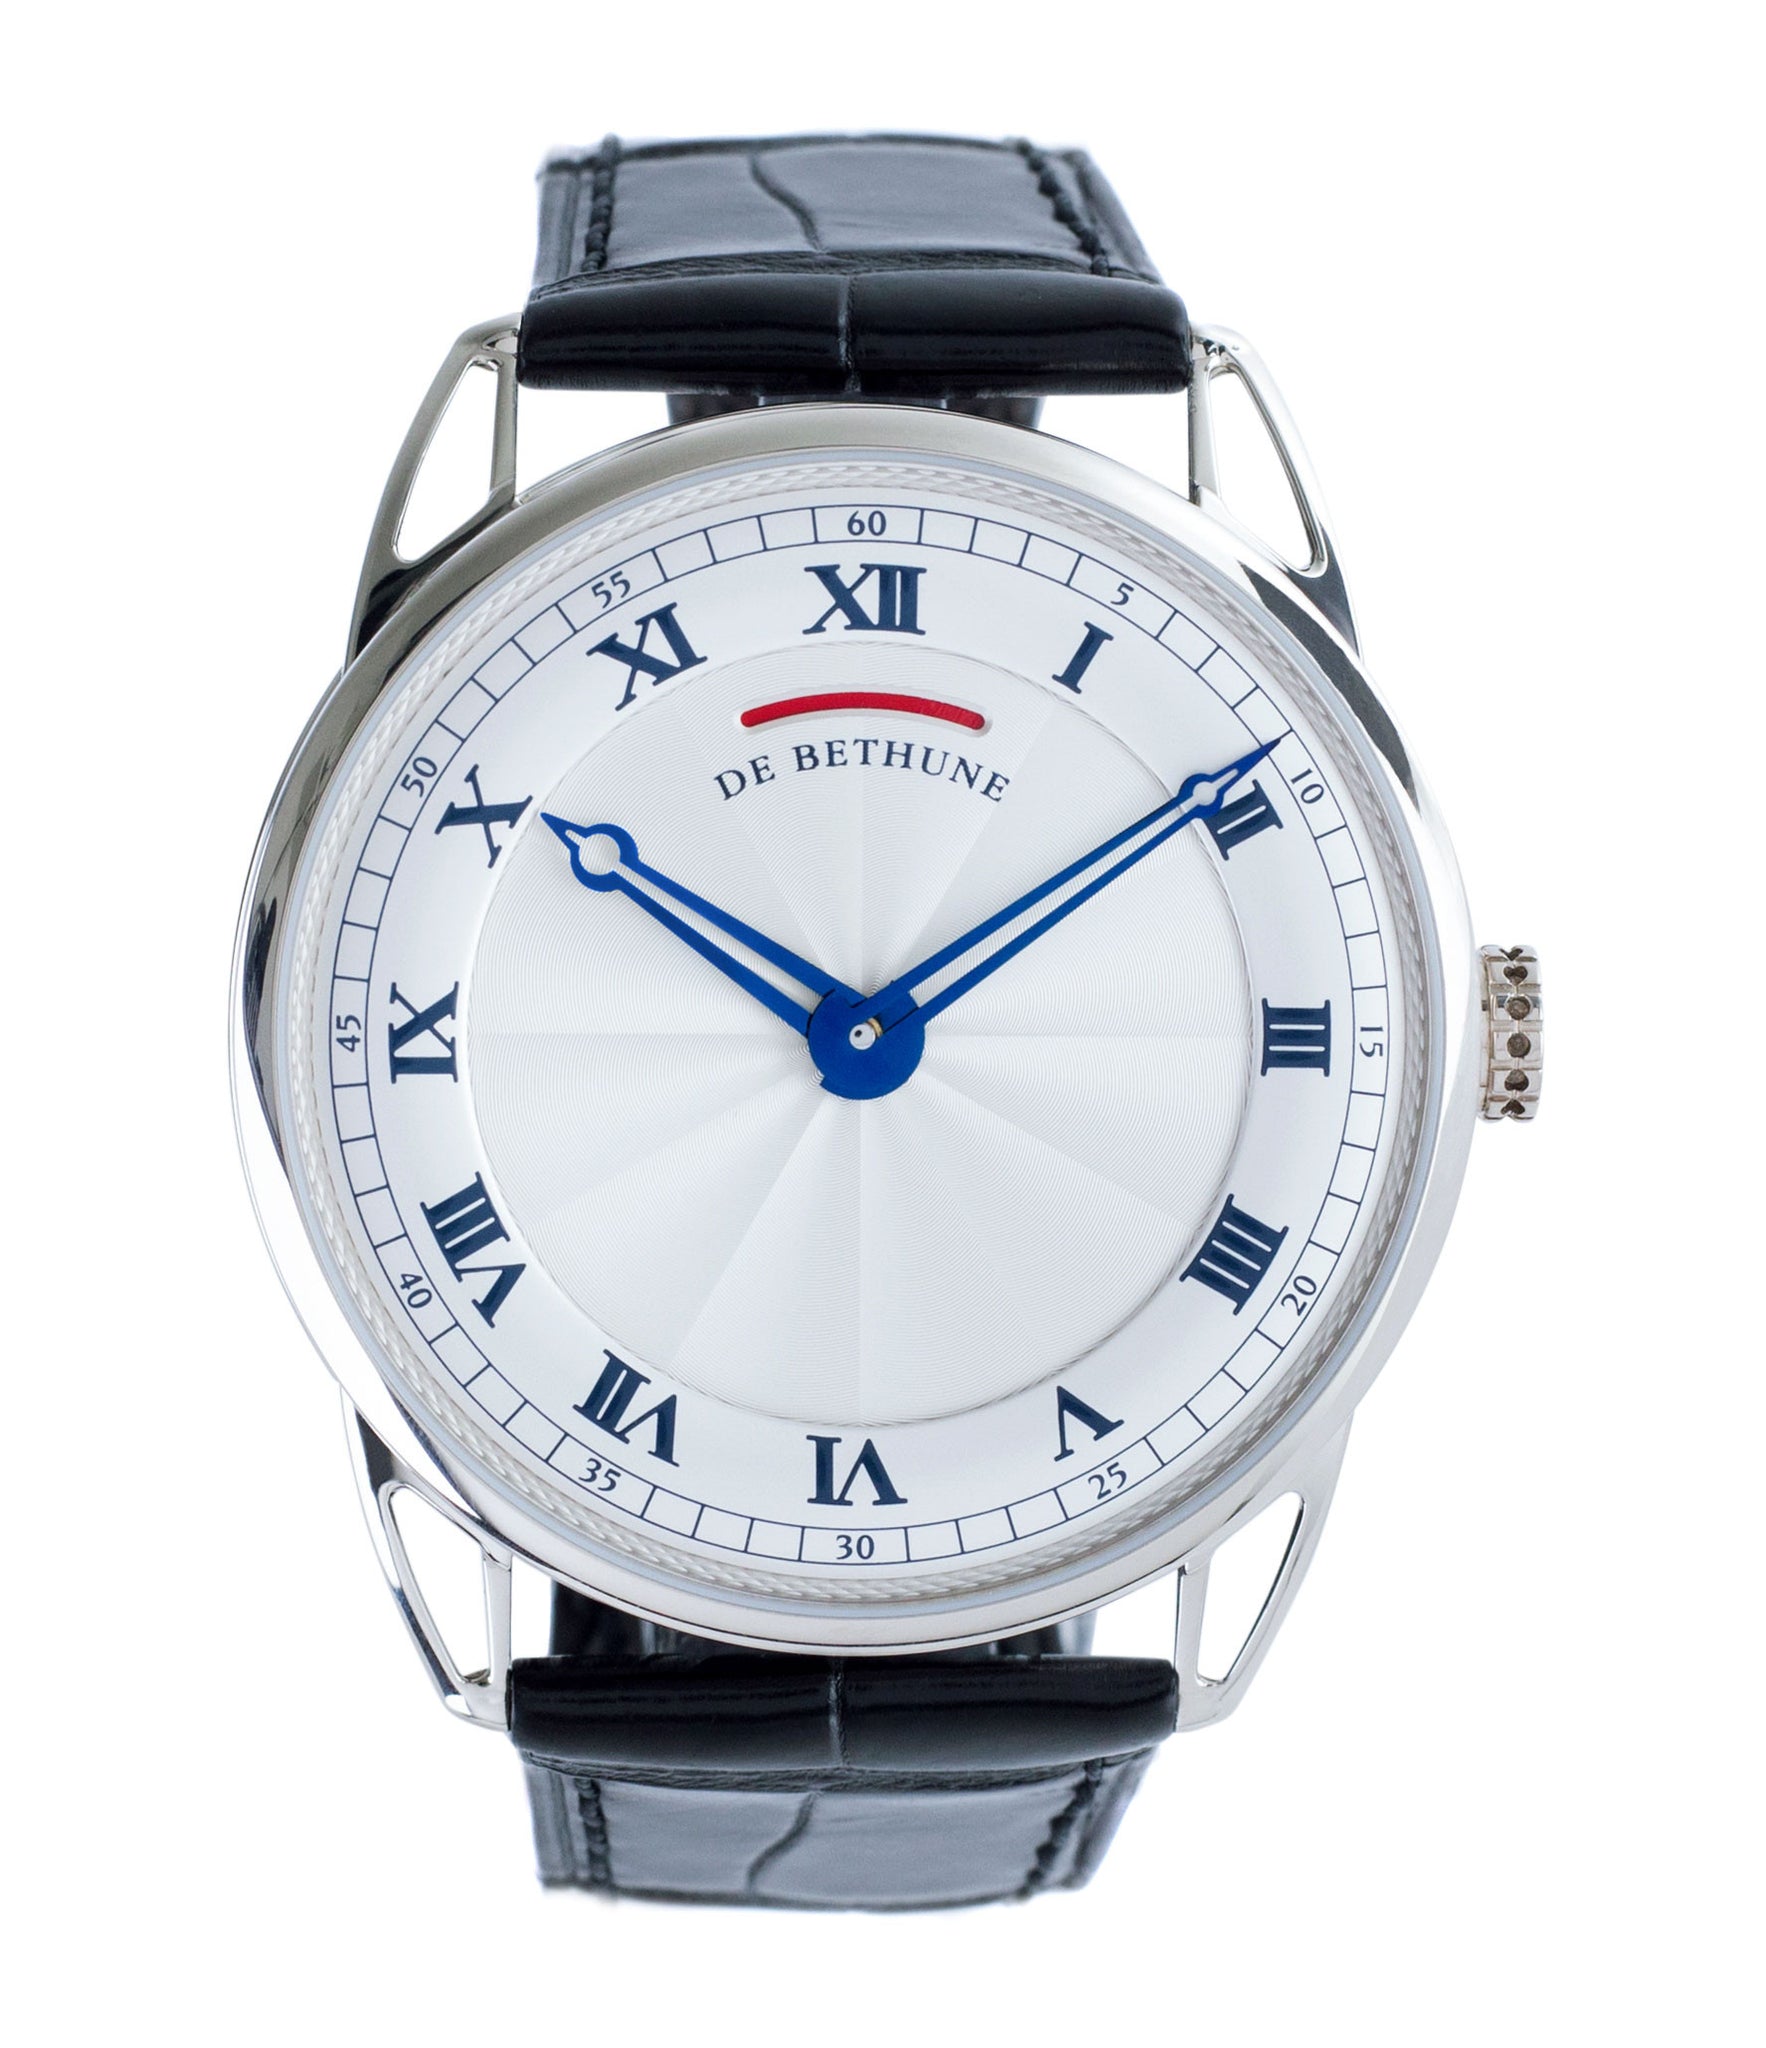 buy De Bethune DB25 white gold preowned luxury gentlemen's wristwatch for sale online at A Collected Man London approved reseller of independent watchmakers